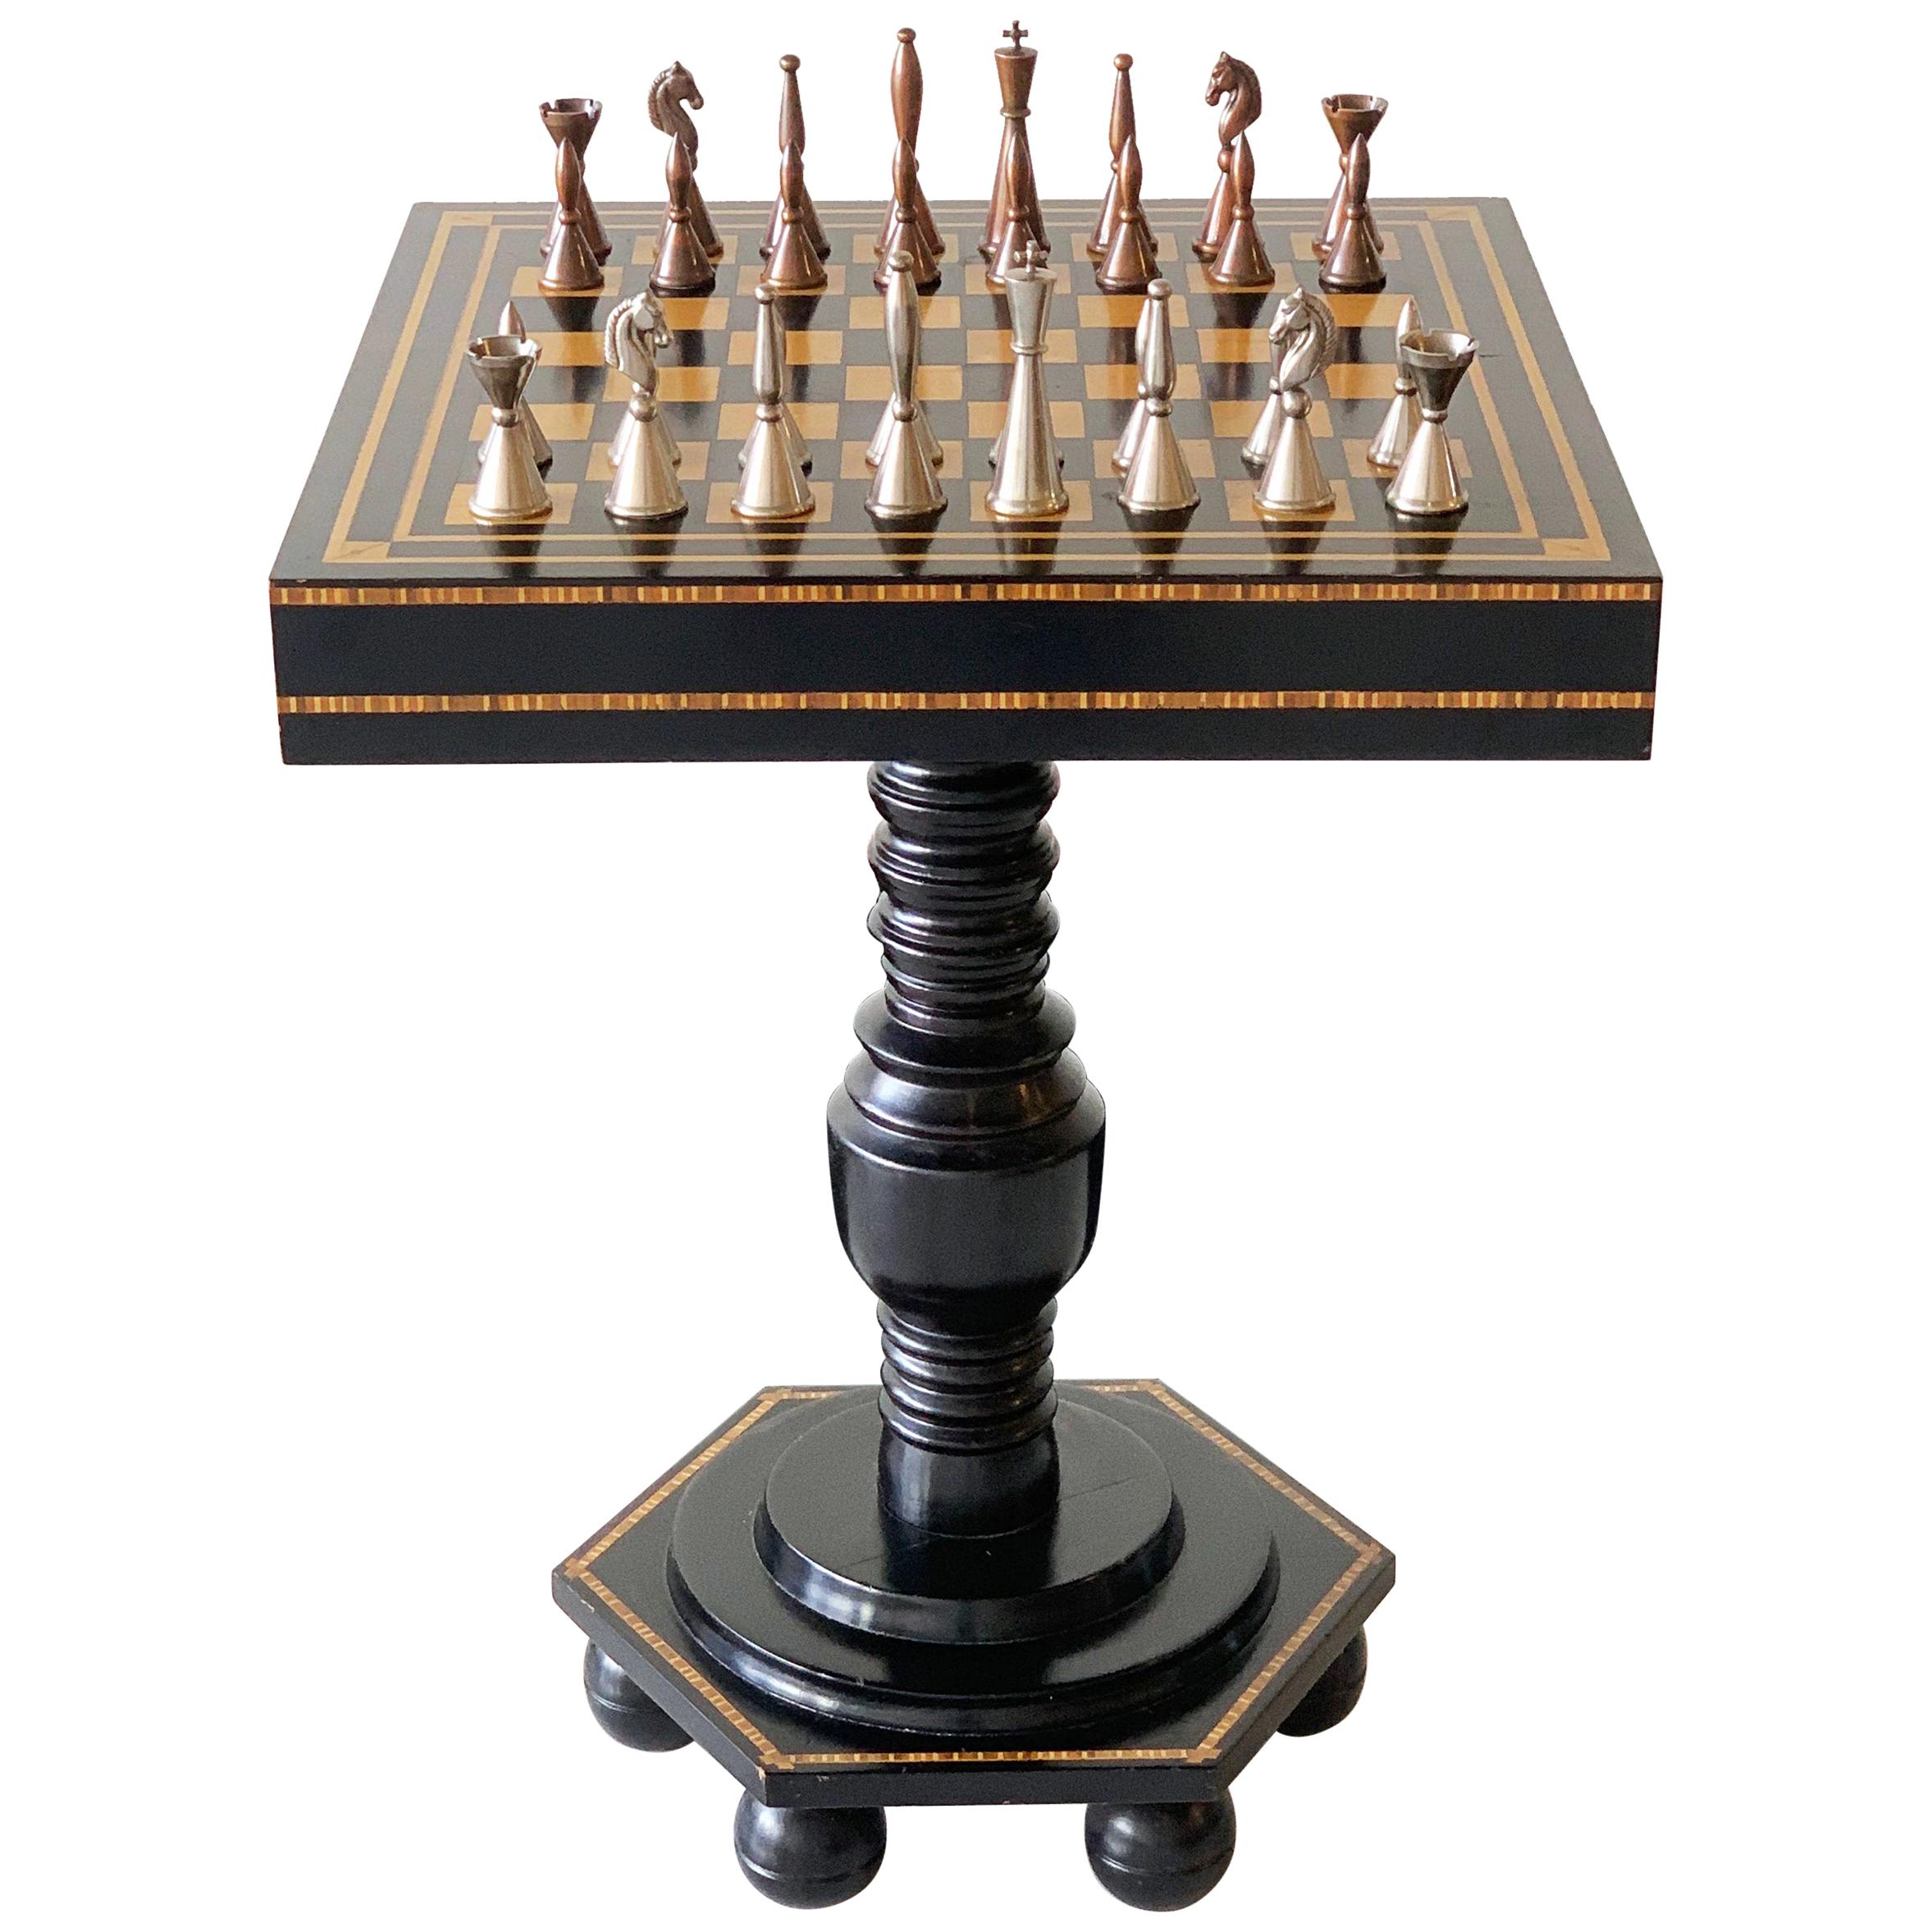 Ebonized and Inlaid Art Deco Game Table with Chess Pieces